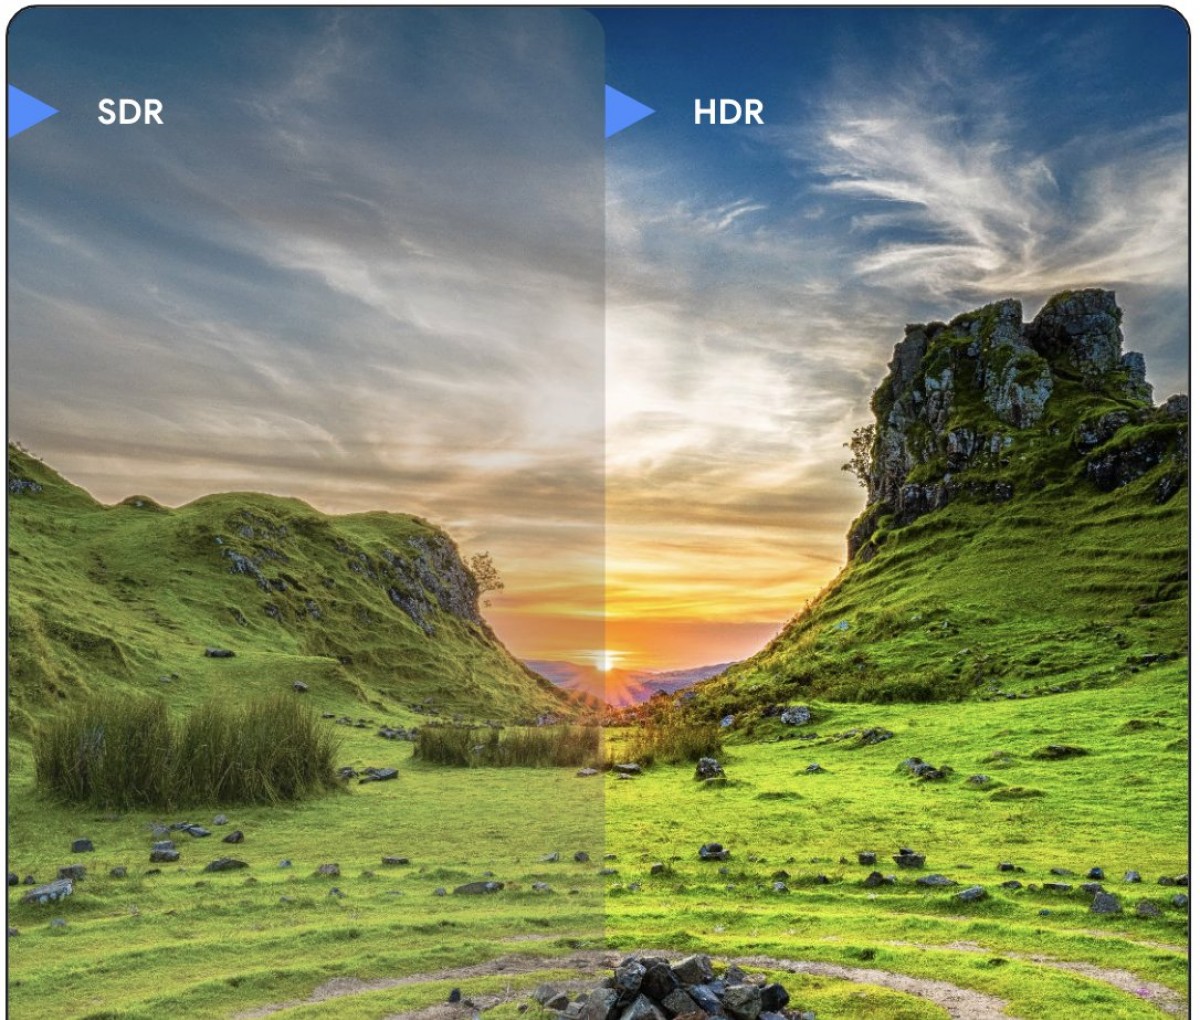 Google Messages gets support for Ultra HDR images over RCS